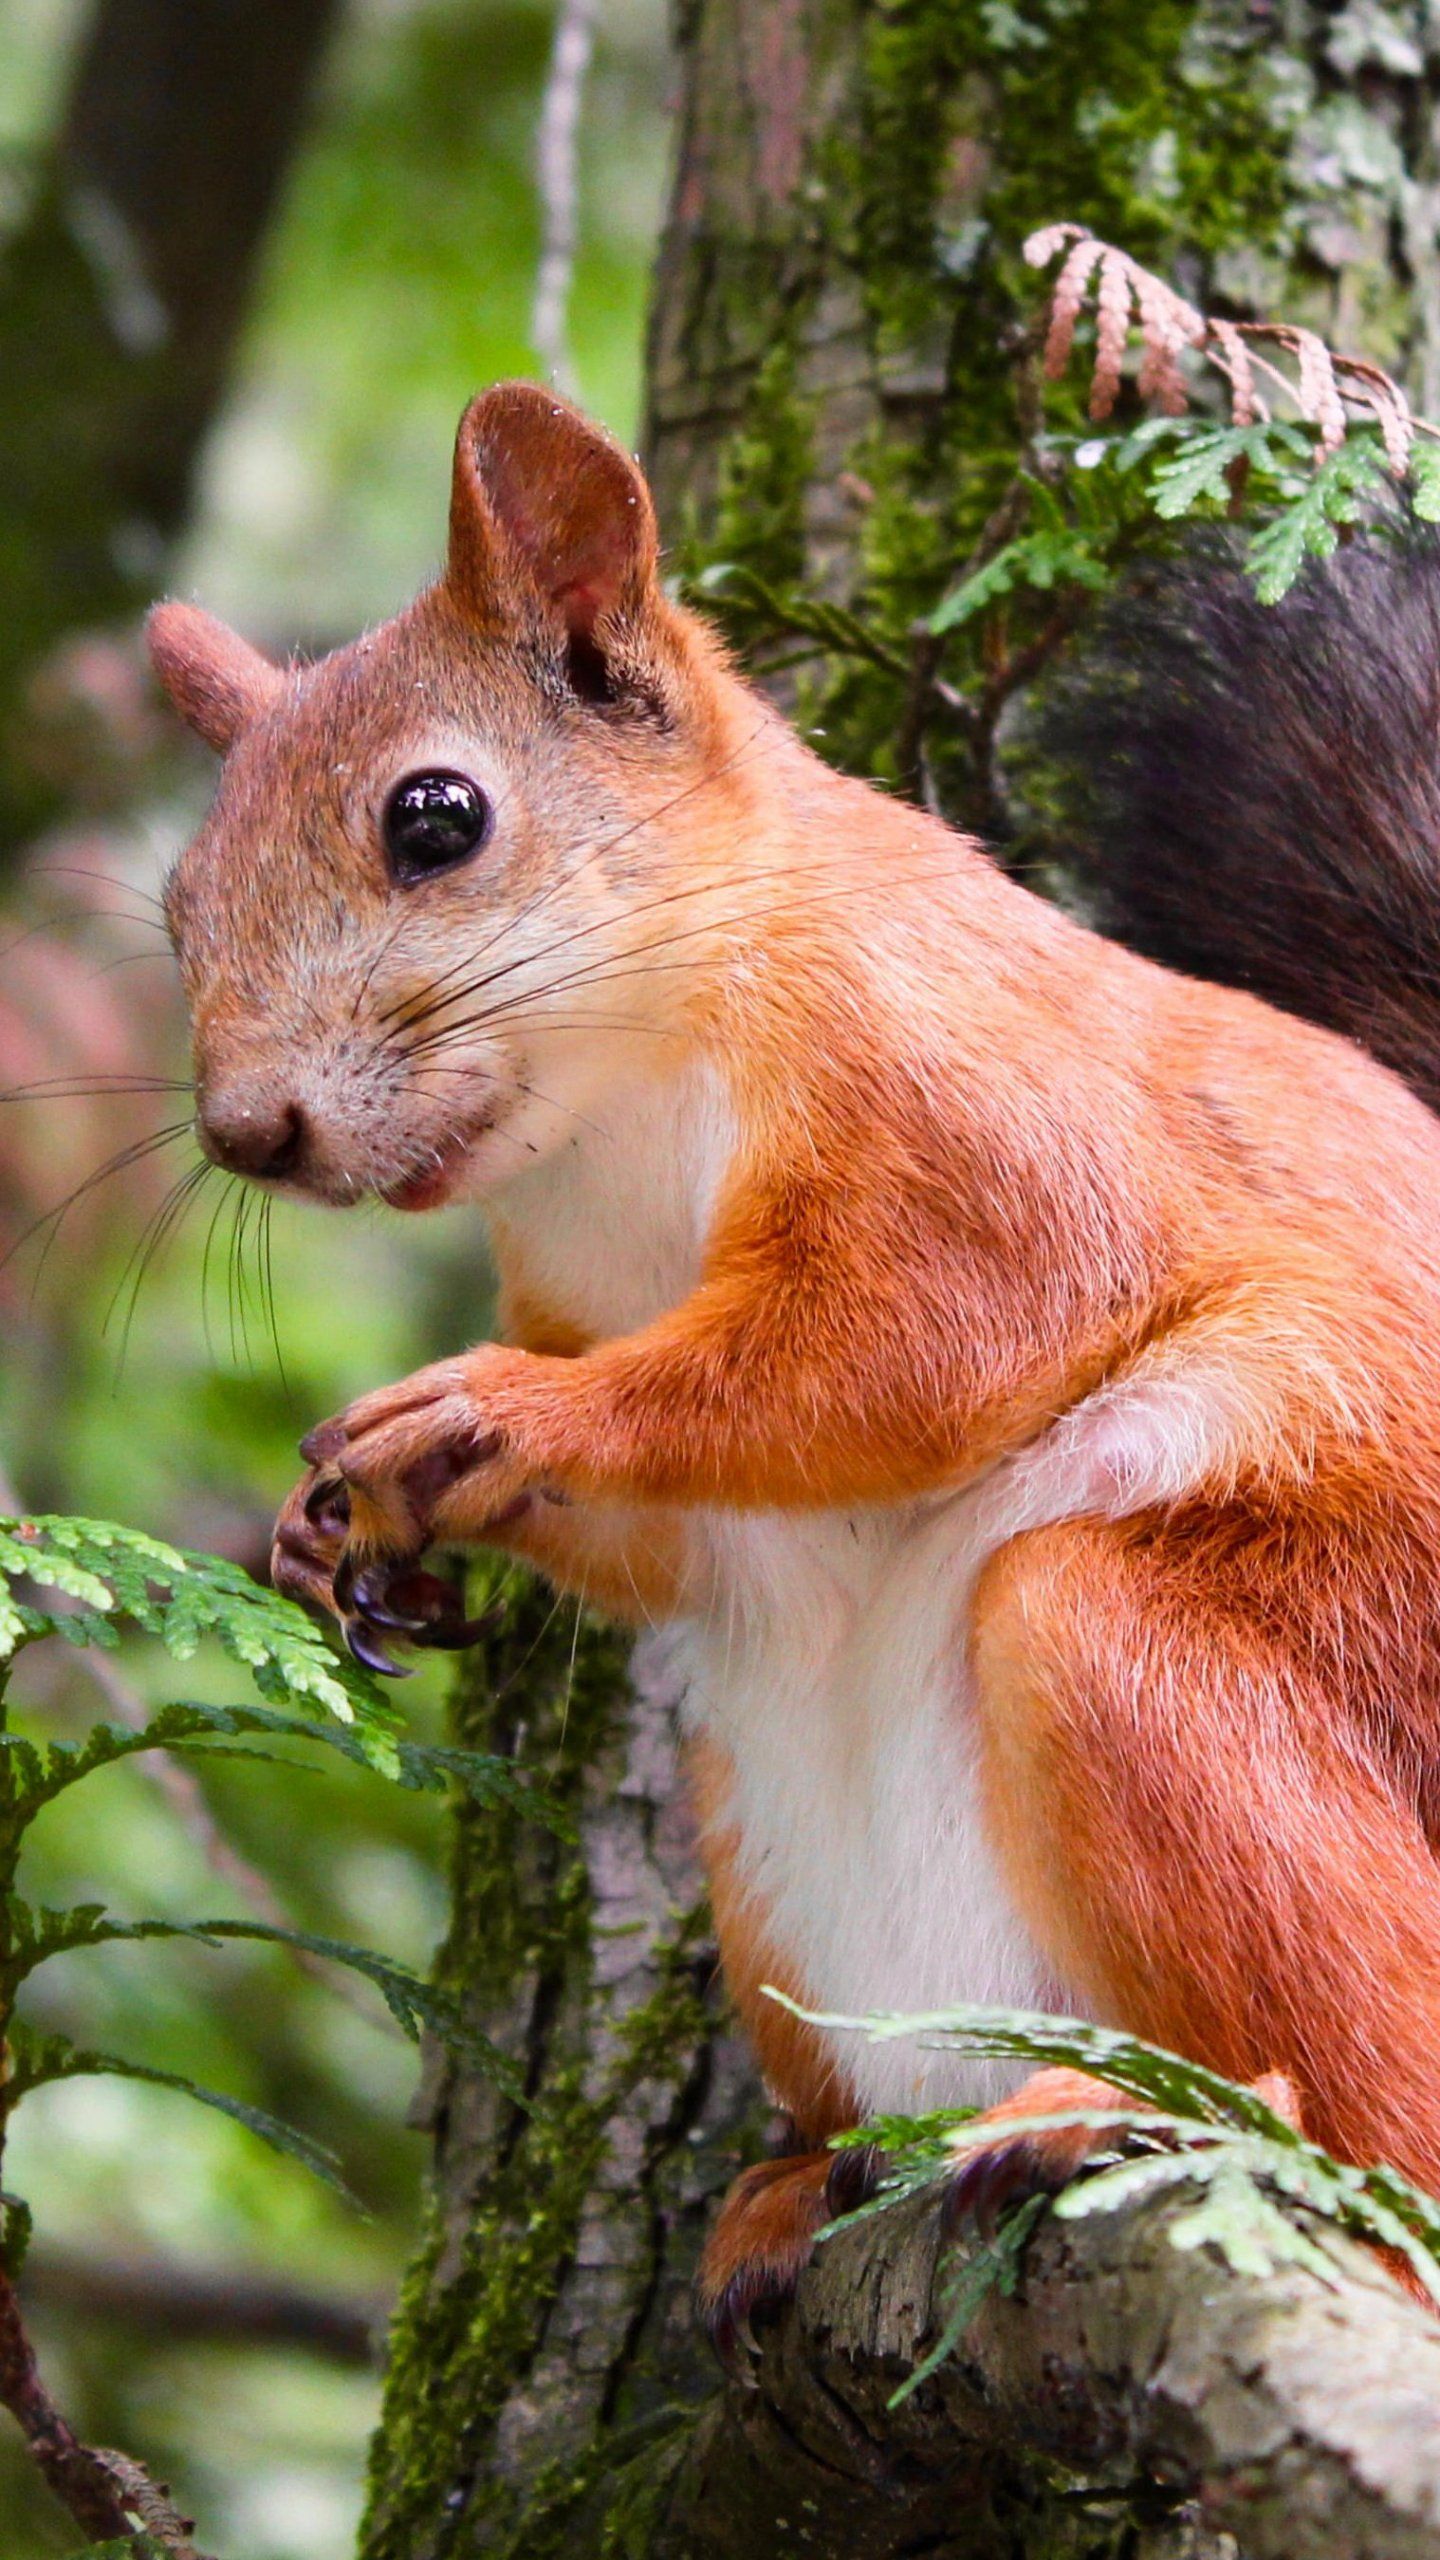 Adorable Squirrel In Tree Wallpaper, Android & Desktop Background